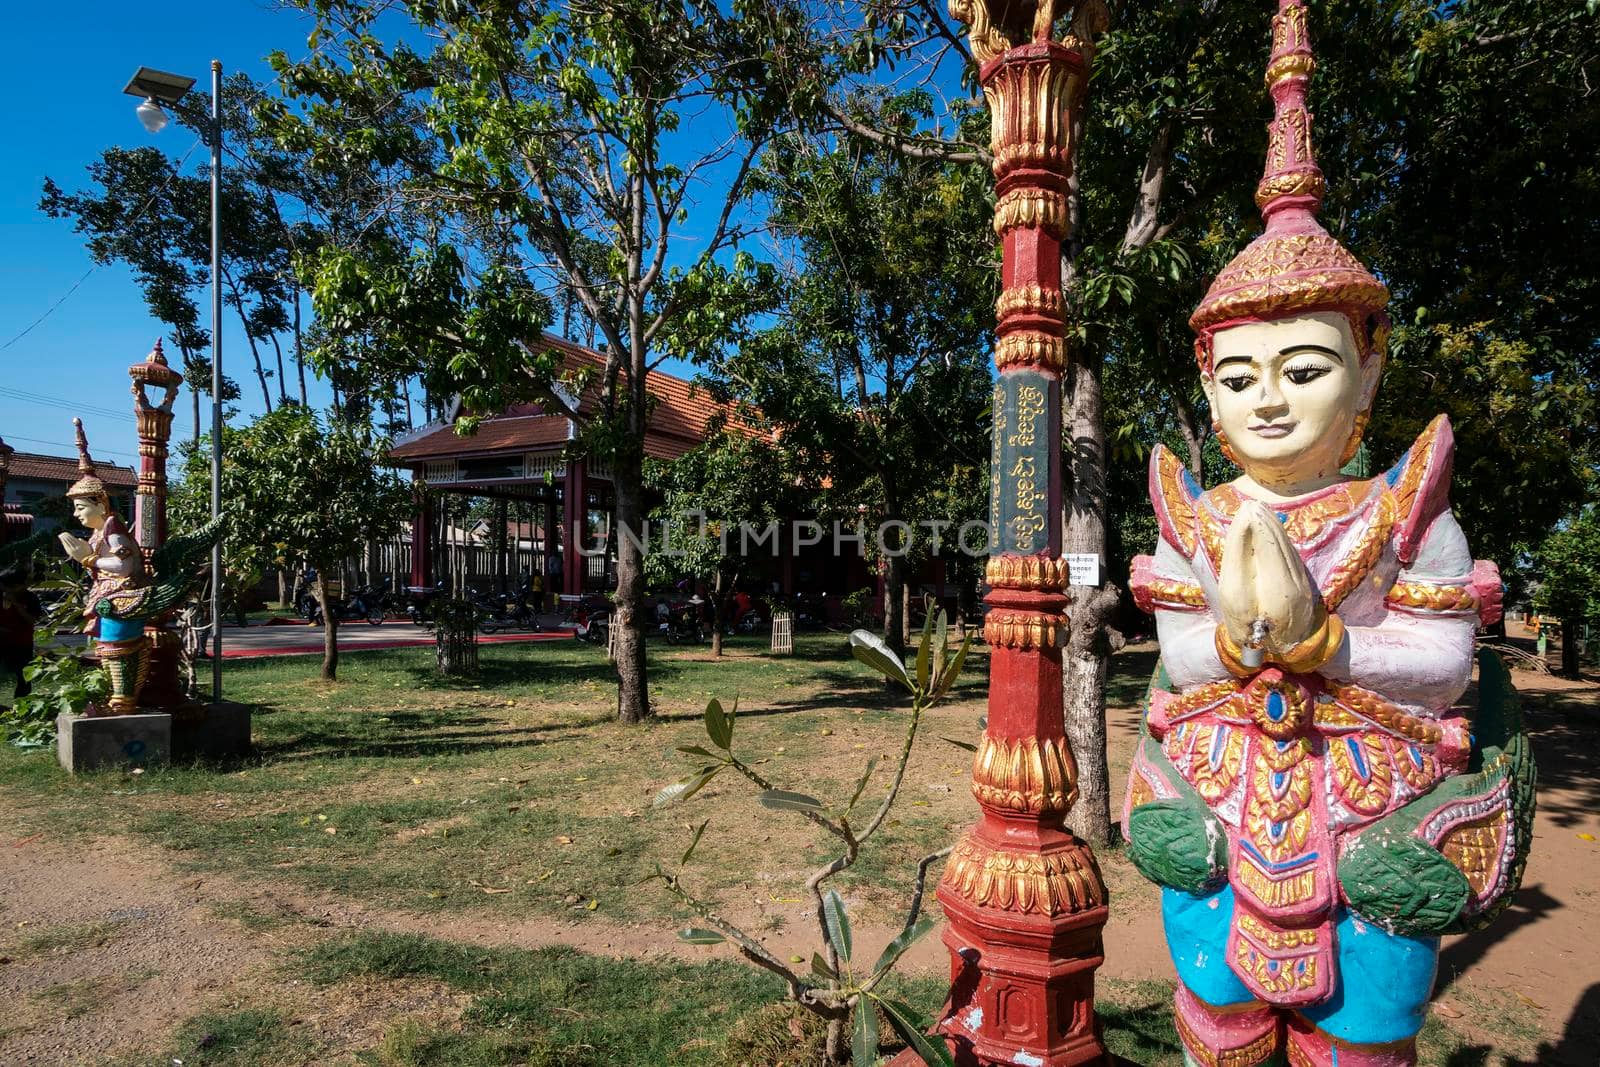 buddhist religious statue at Wat Svay Andet Pagoda in Cambodia by jackmalipan